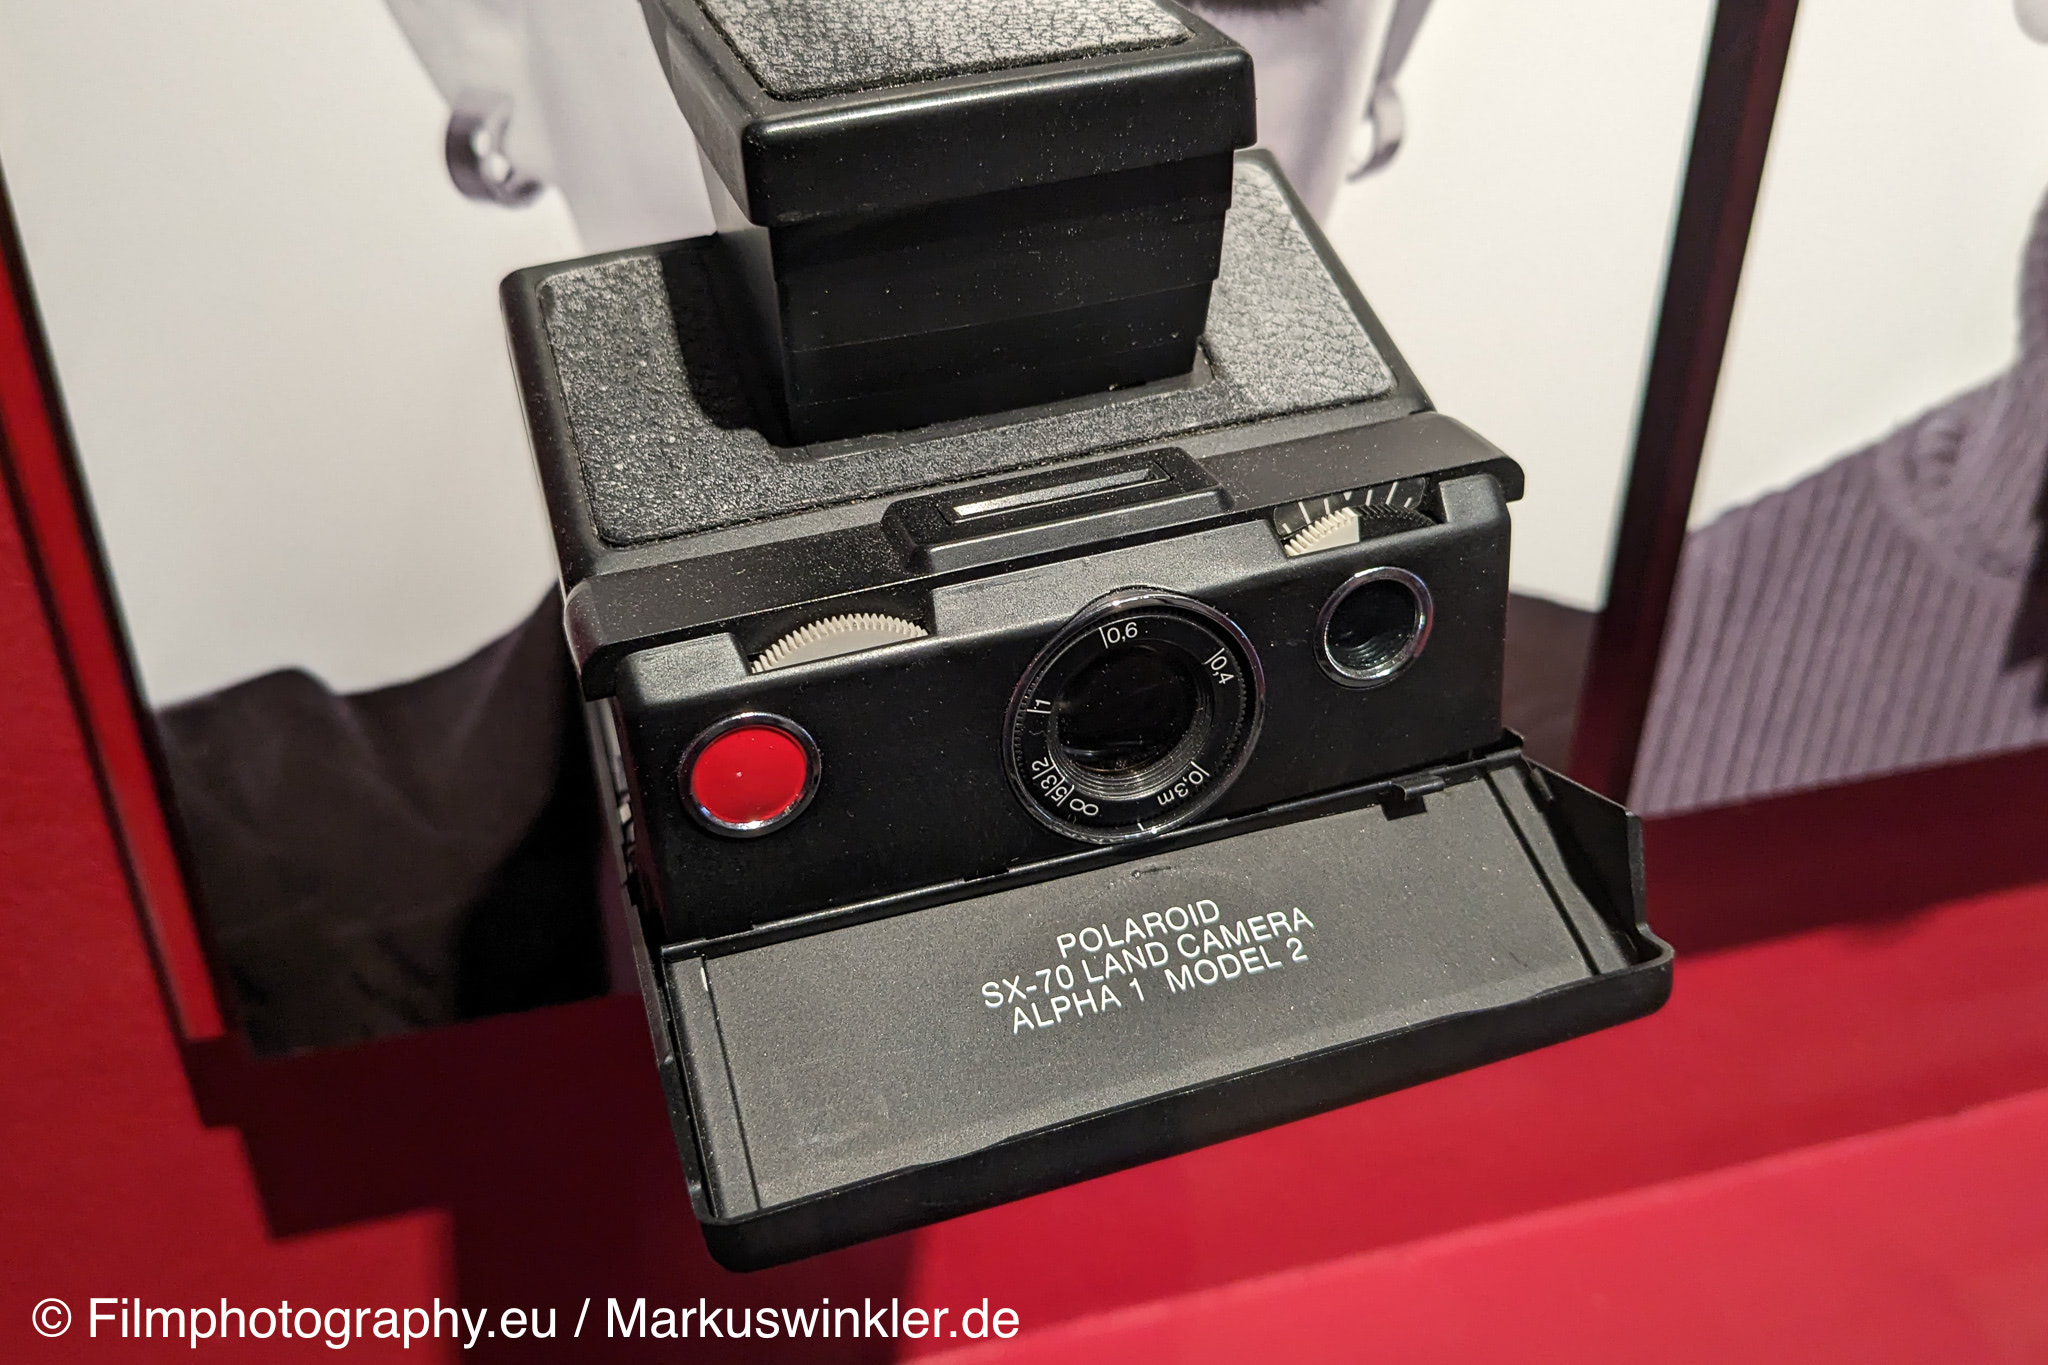 Polaroid SX-70 Alpha 1 Model 2 - Features of the camera